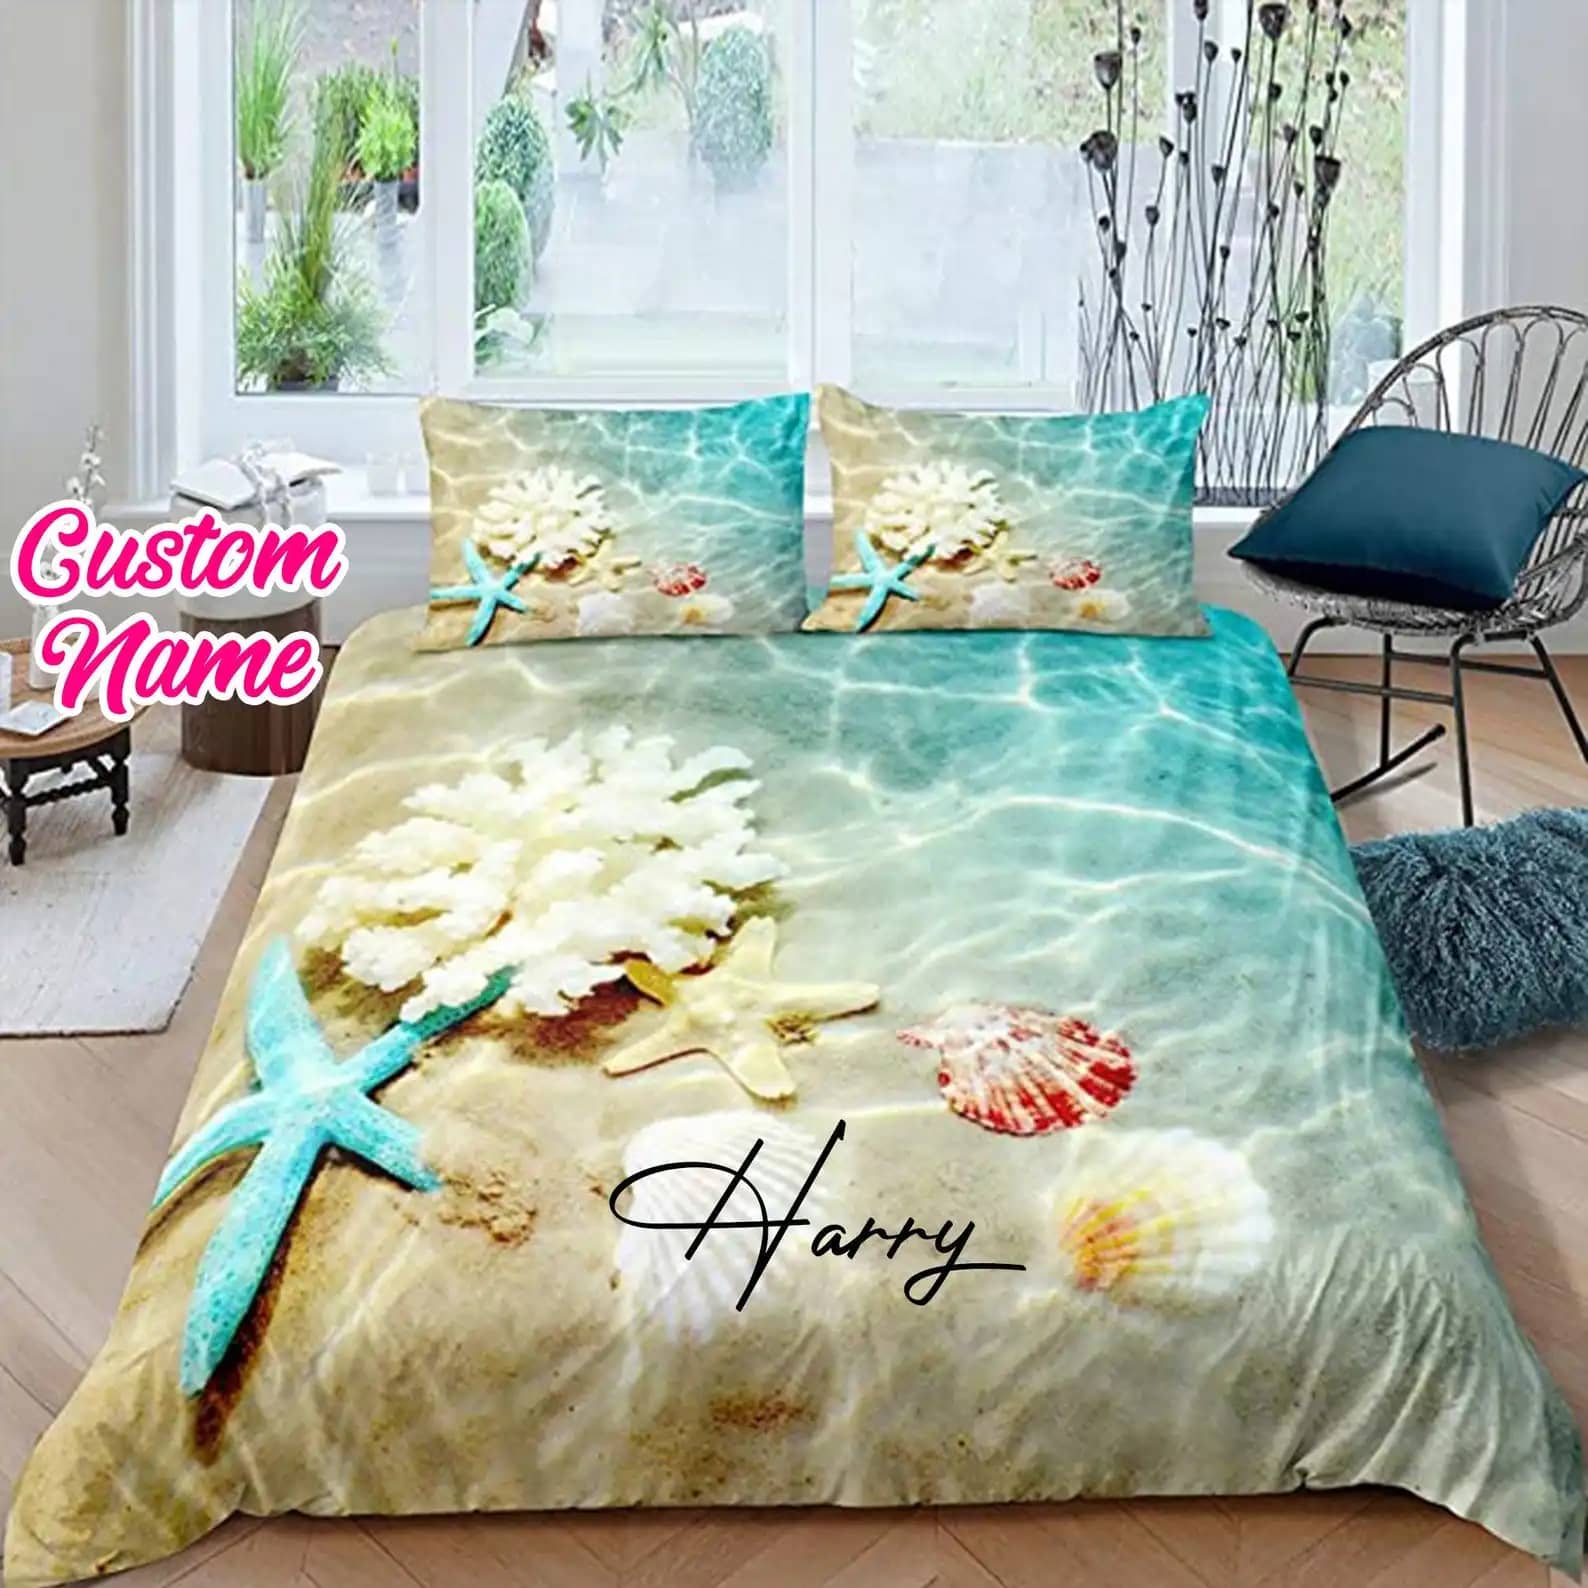 Personalized Ocean Quilt Bedding Sets